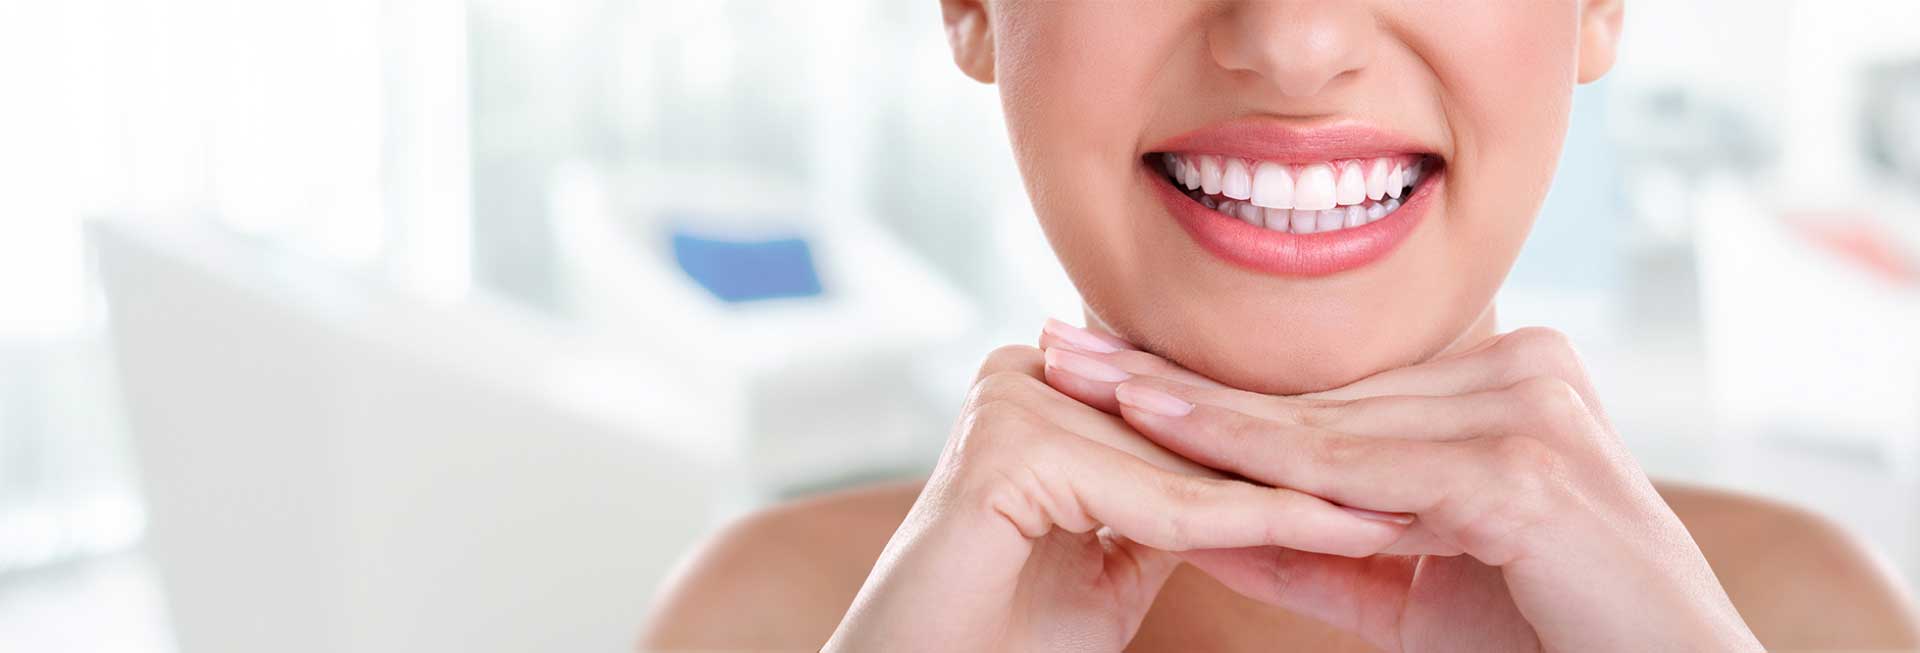 When teeth are healthy smile shines